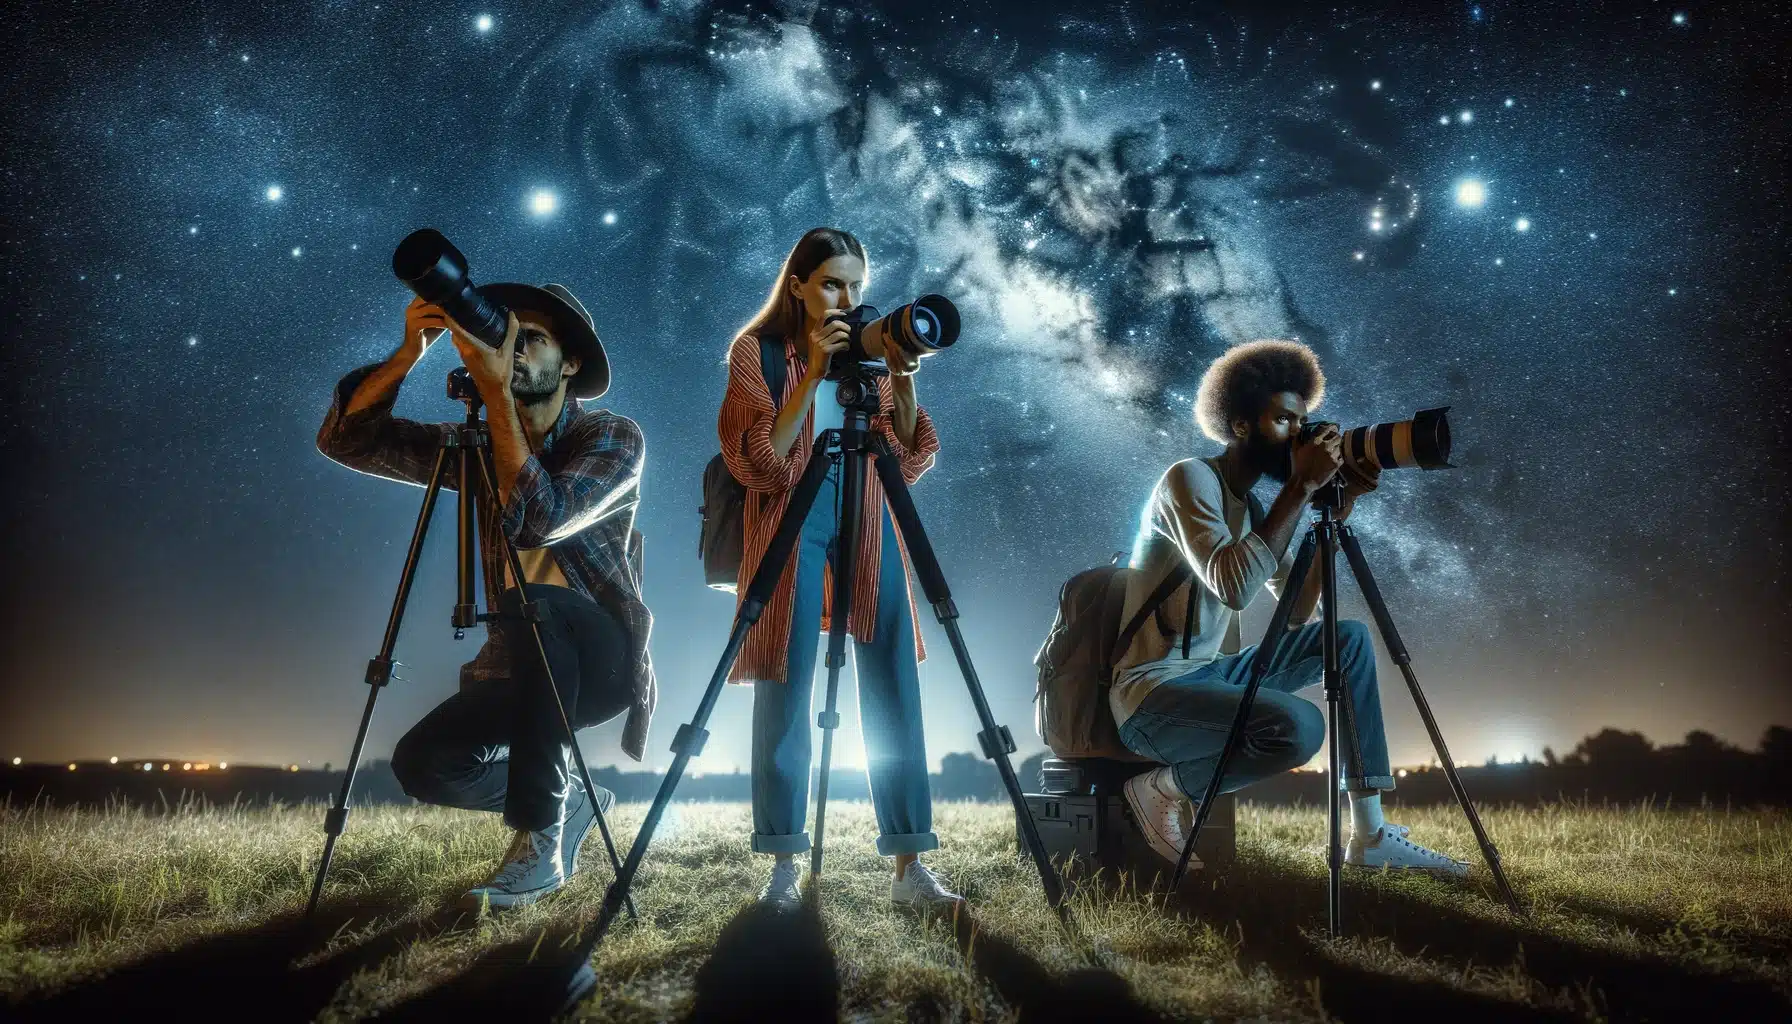 Three photographers, a Hispanic male adjusting his lens, a Caucasian female reviewing camera settings, and an African male looking through his viewfinder, capture the starry night sky in a dark night, each using tripods and specialized settings to photograph the celestial scene.